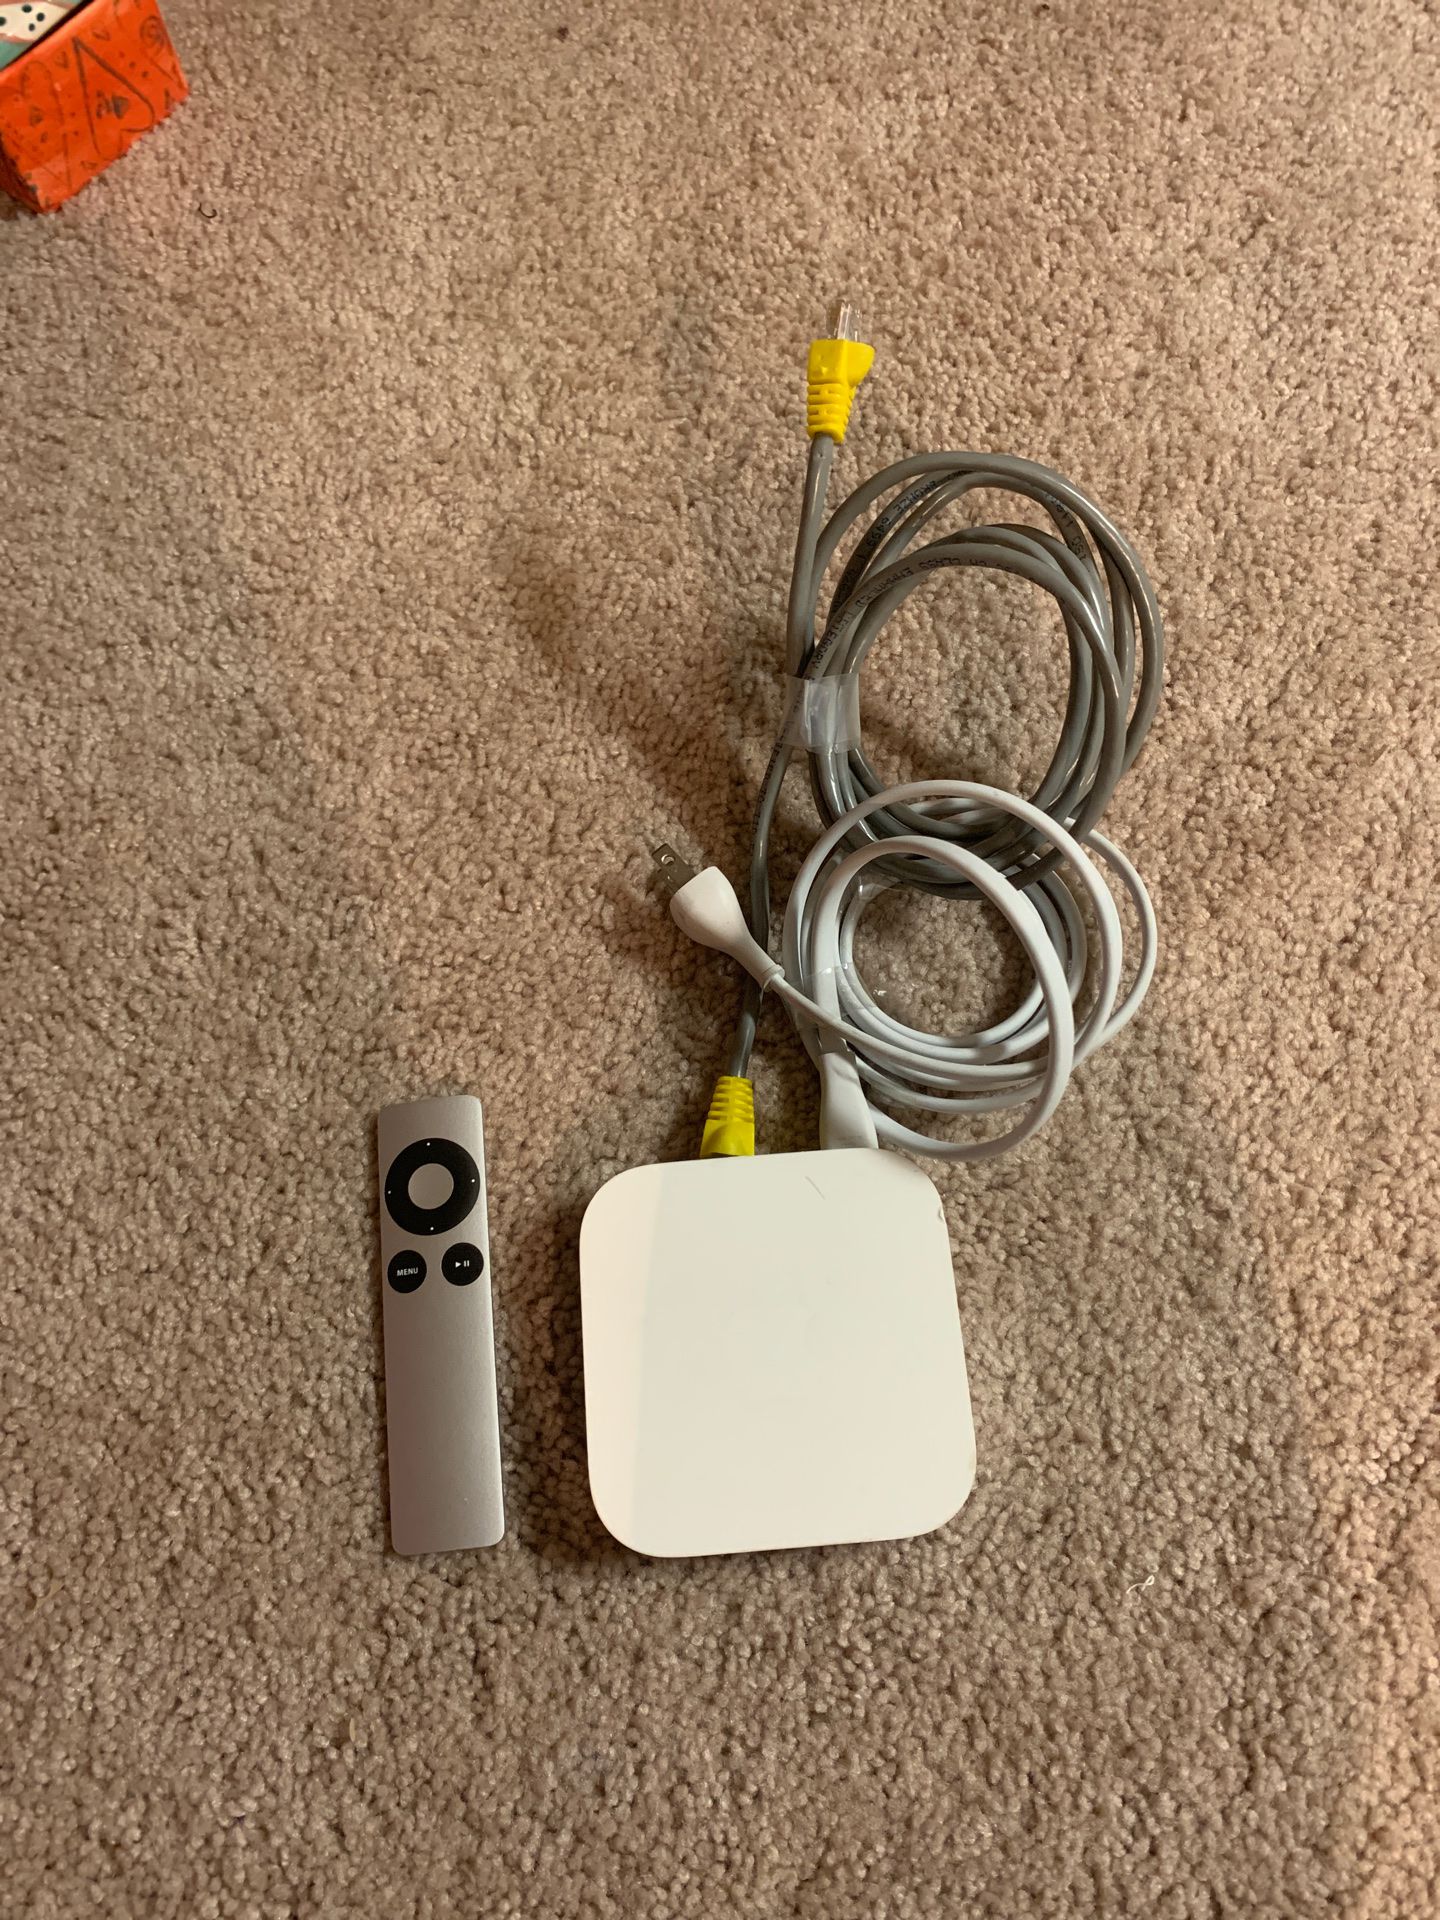 Apple TV Airport express with cable and remote